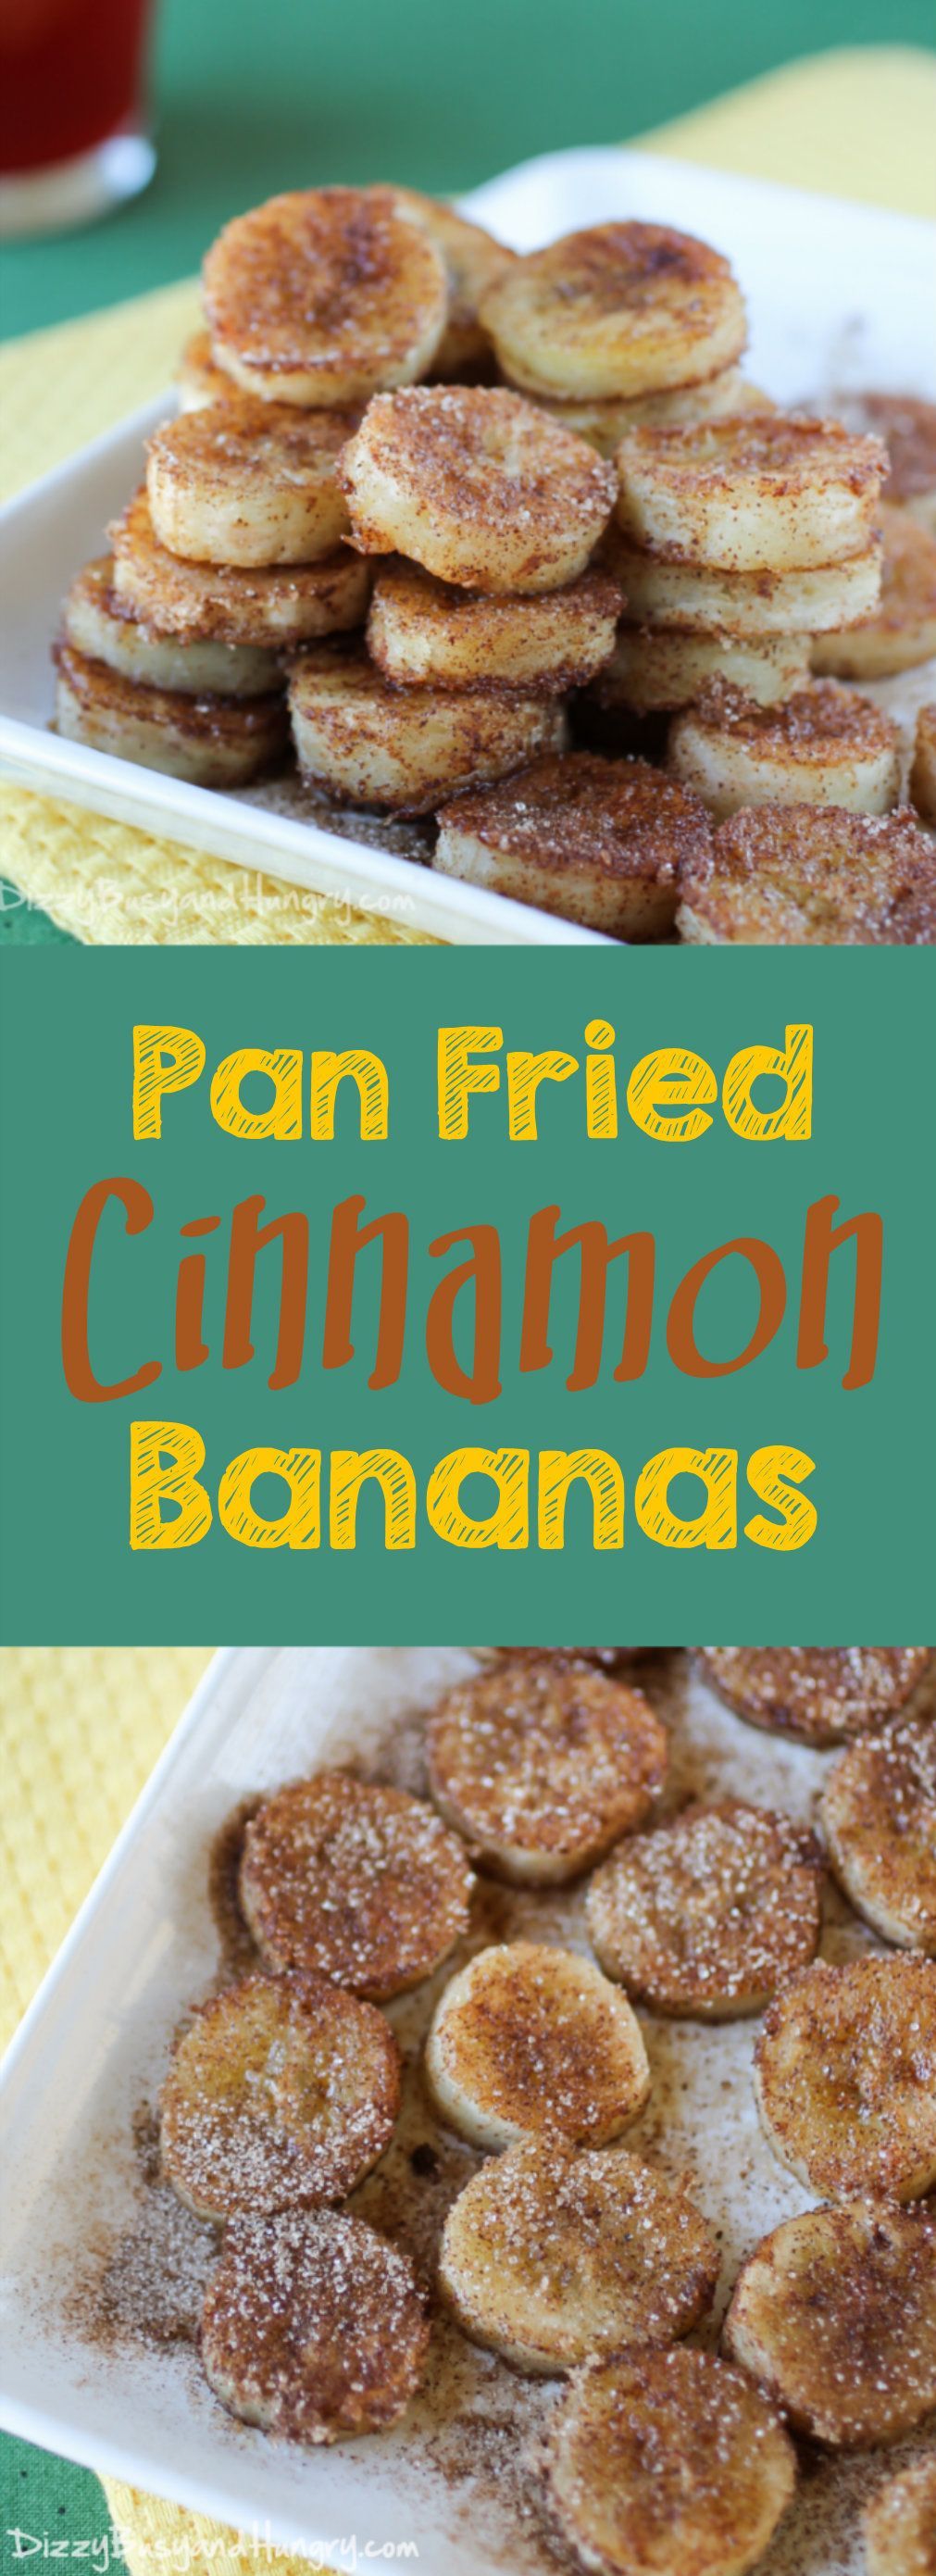 Pan Fried Cinnamon Bananas – Quick and easy recipe for overripe bananas, perfect for a special breakfast or an afternoon snack!